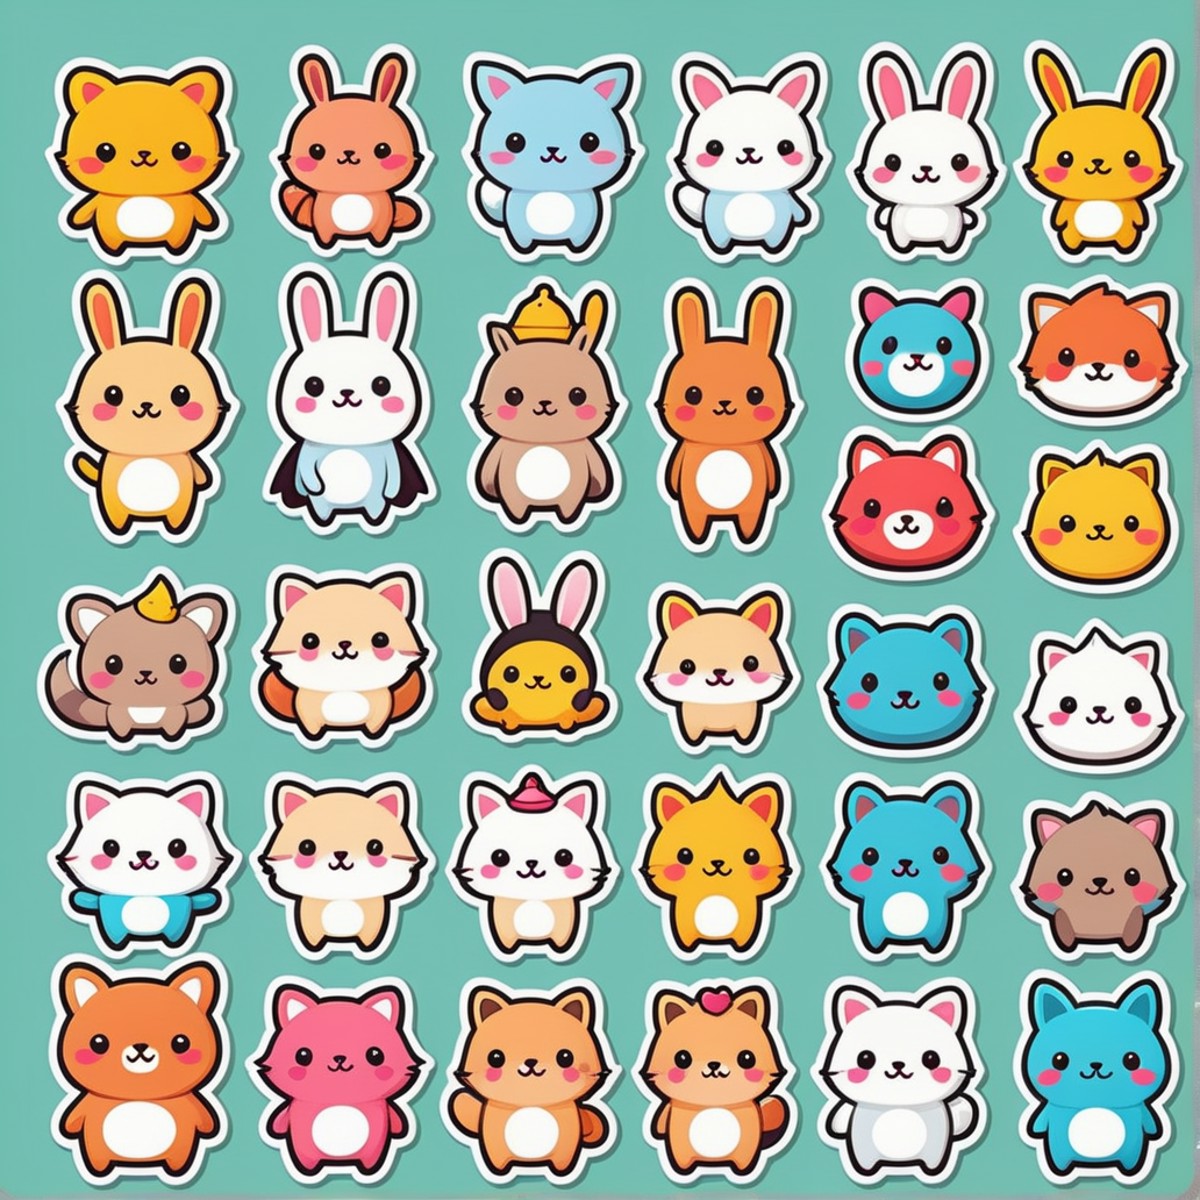 Design a collection of cute kawaii stickers with different fun motifs and figures. Cute cartoon animals kawaii funny splas...